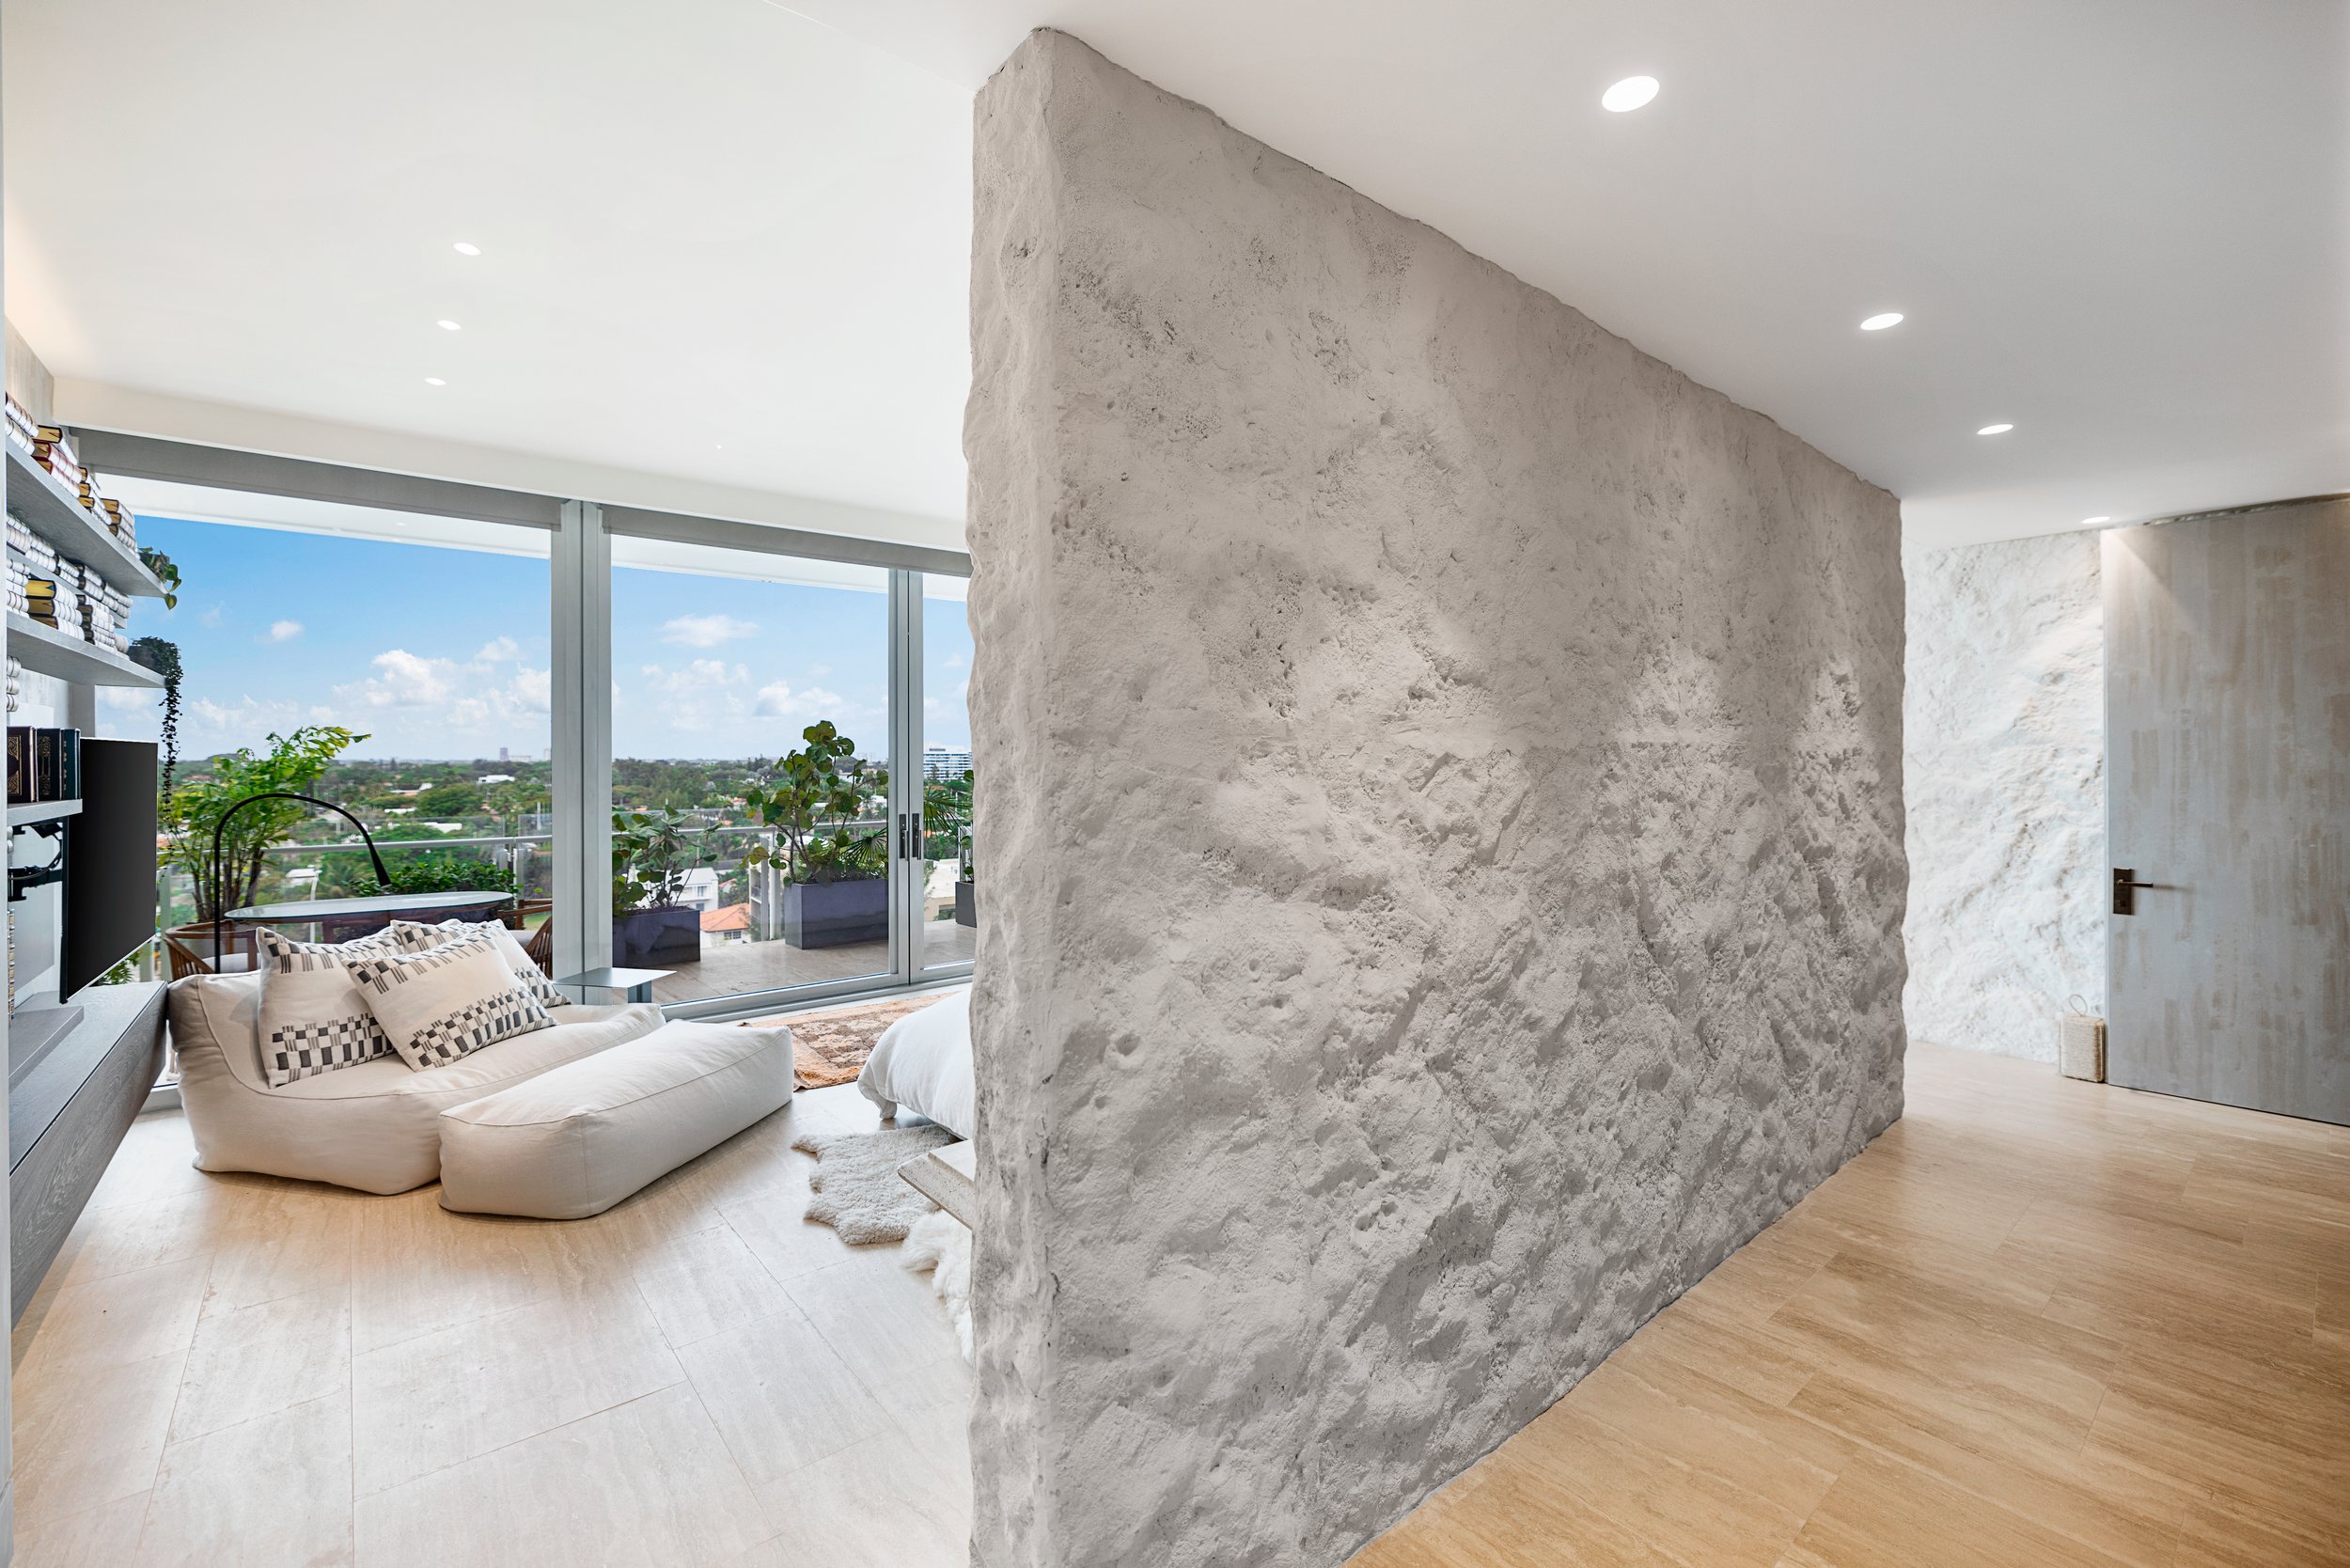 Check Out This Lavish Condo With Custom Wave Ceilings Asking $37 Million At Four Seasons at The Surf Club In Surfside 33.jpg